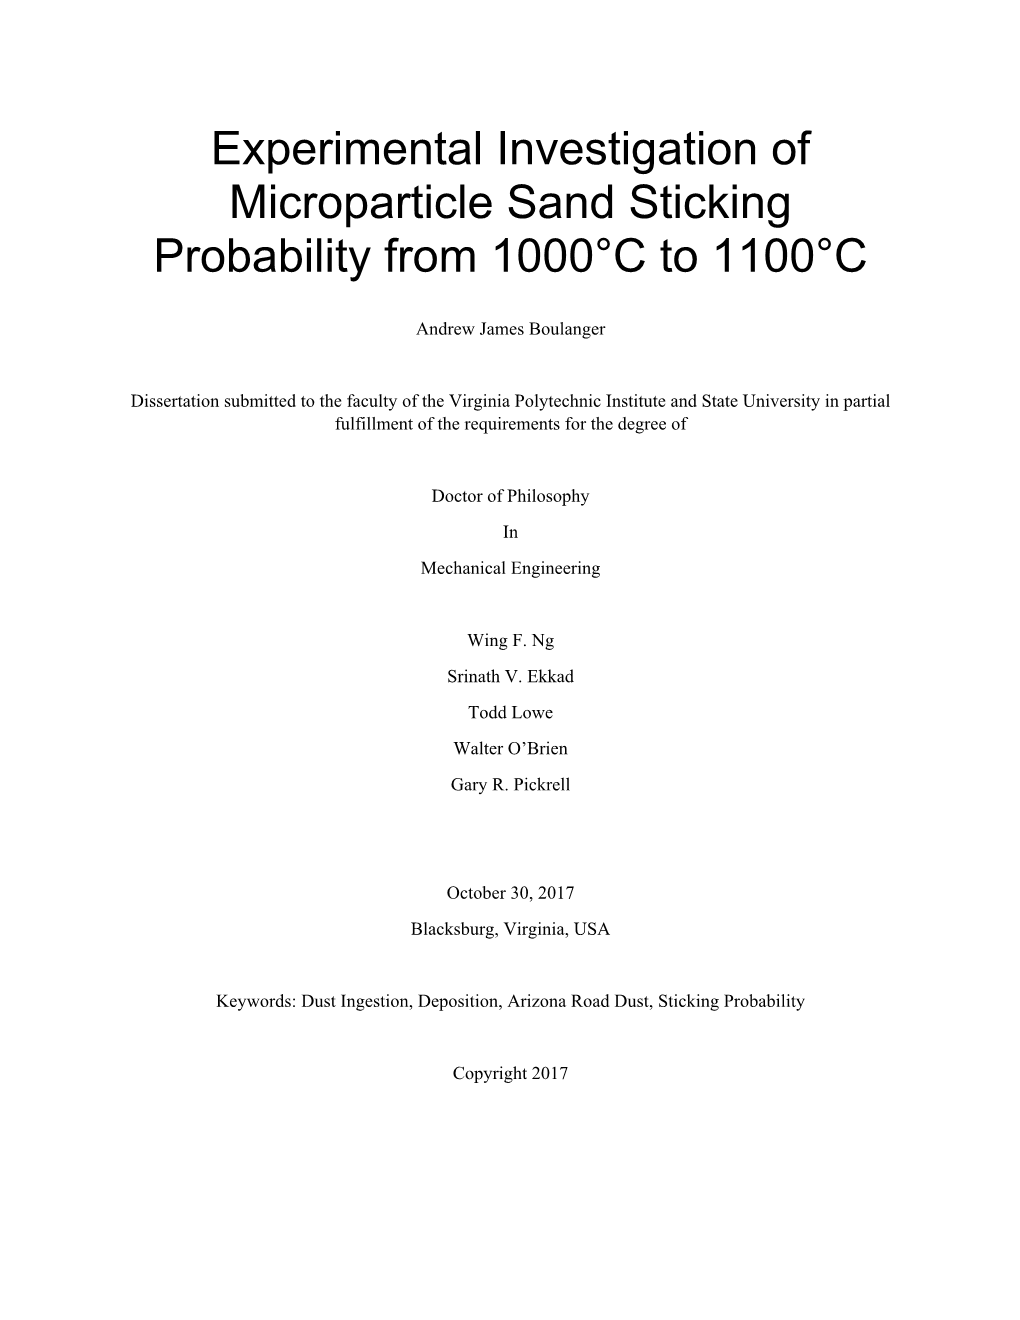 Experimental Investigation of Microparticle Sand Sticking Probability from 1000°C to 1100°C